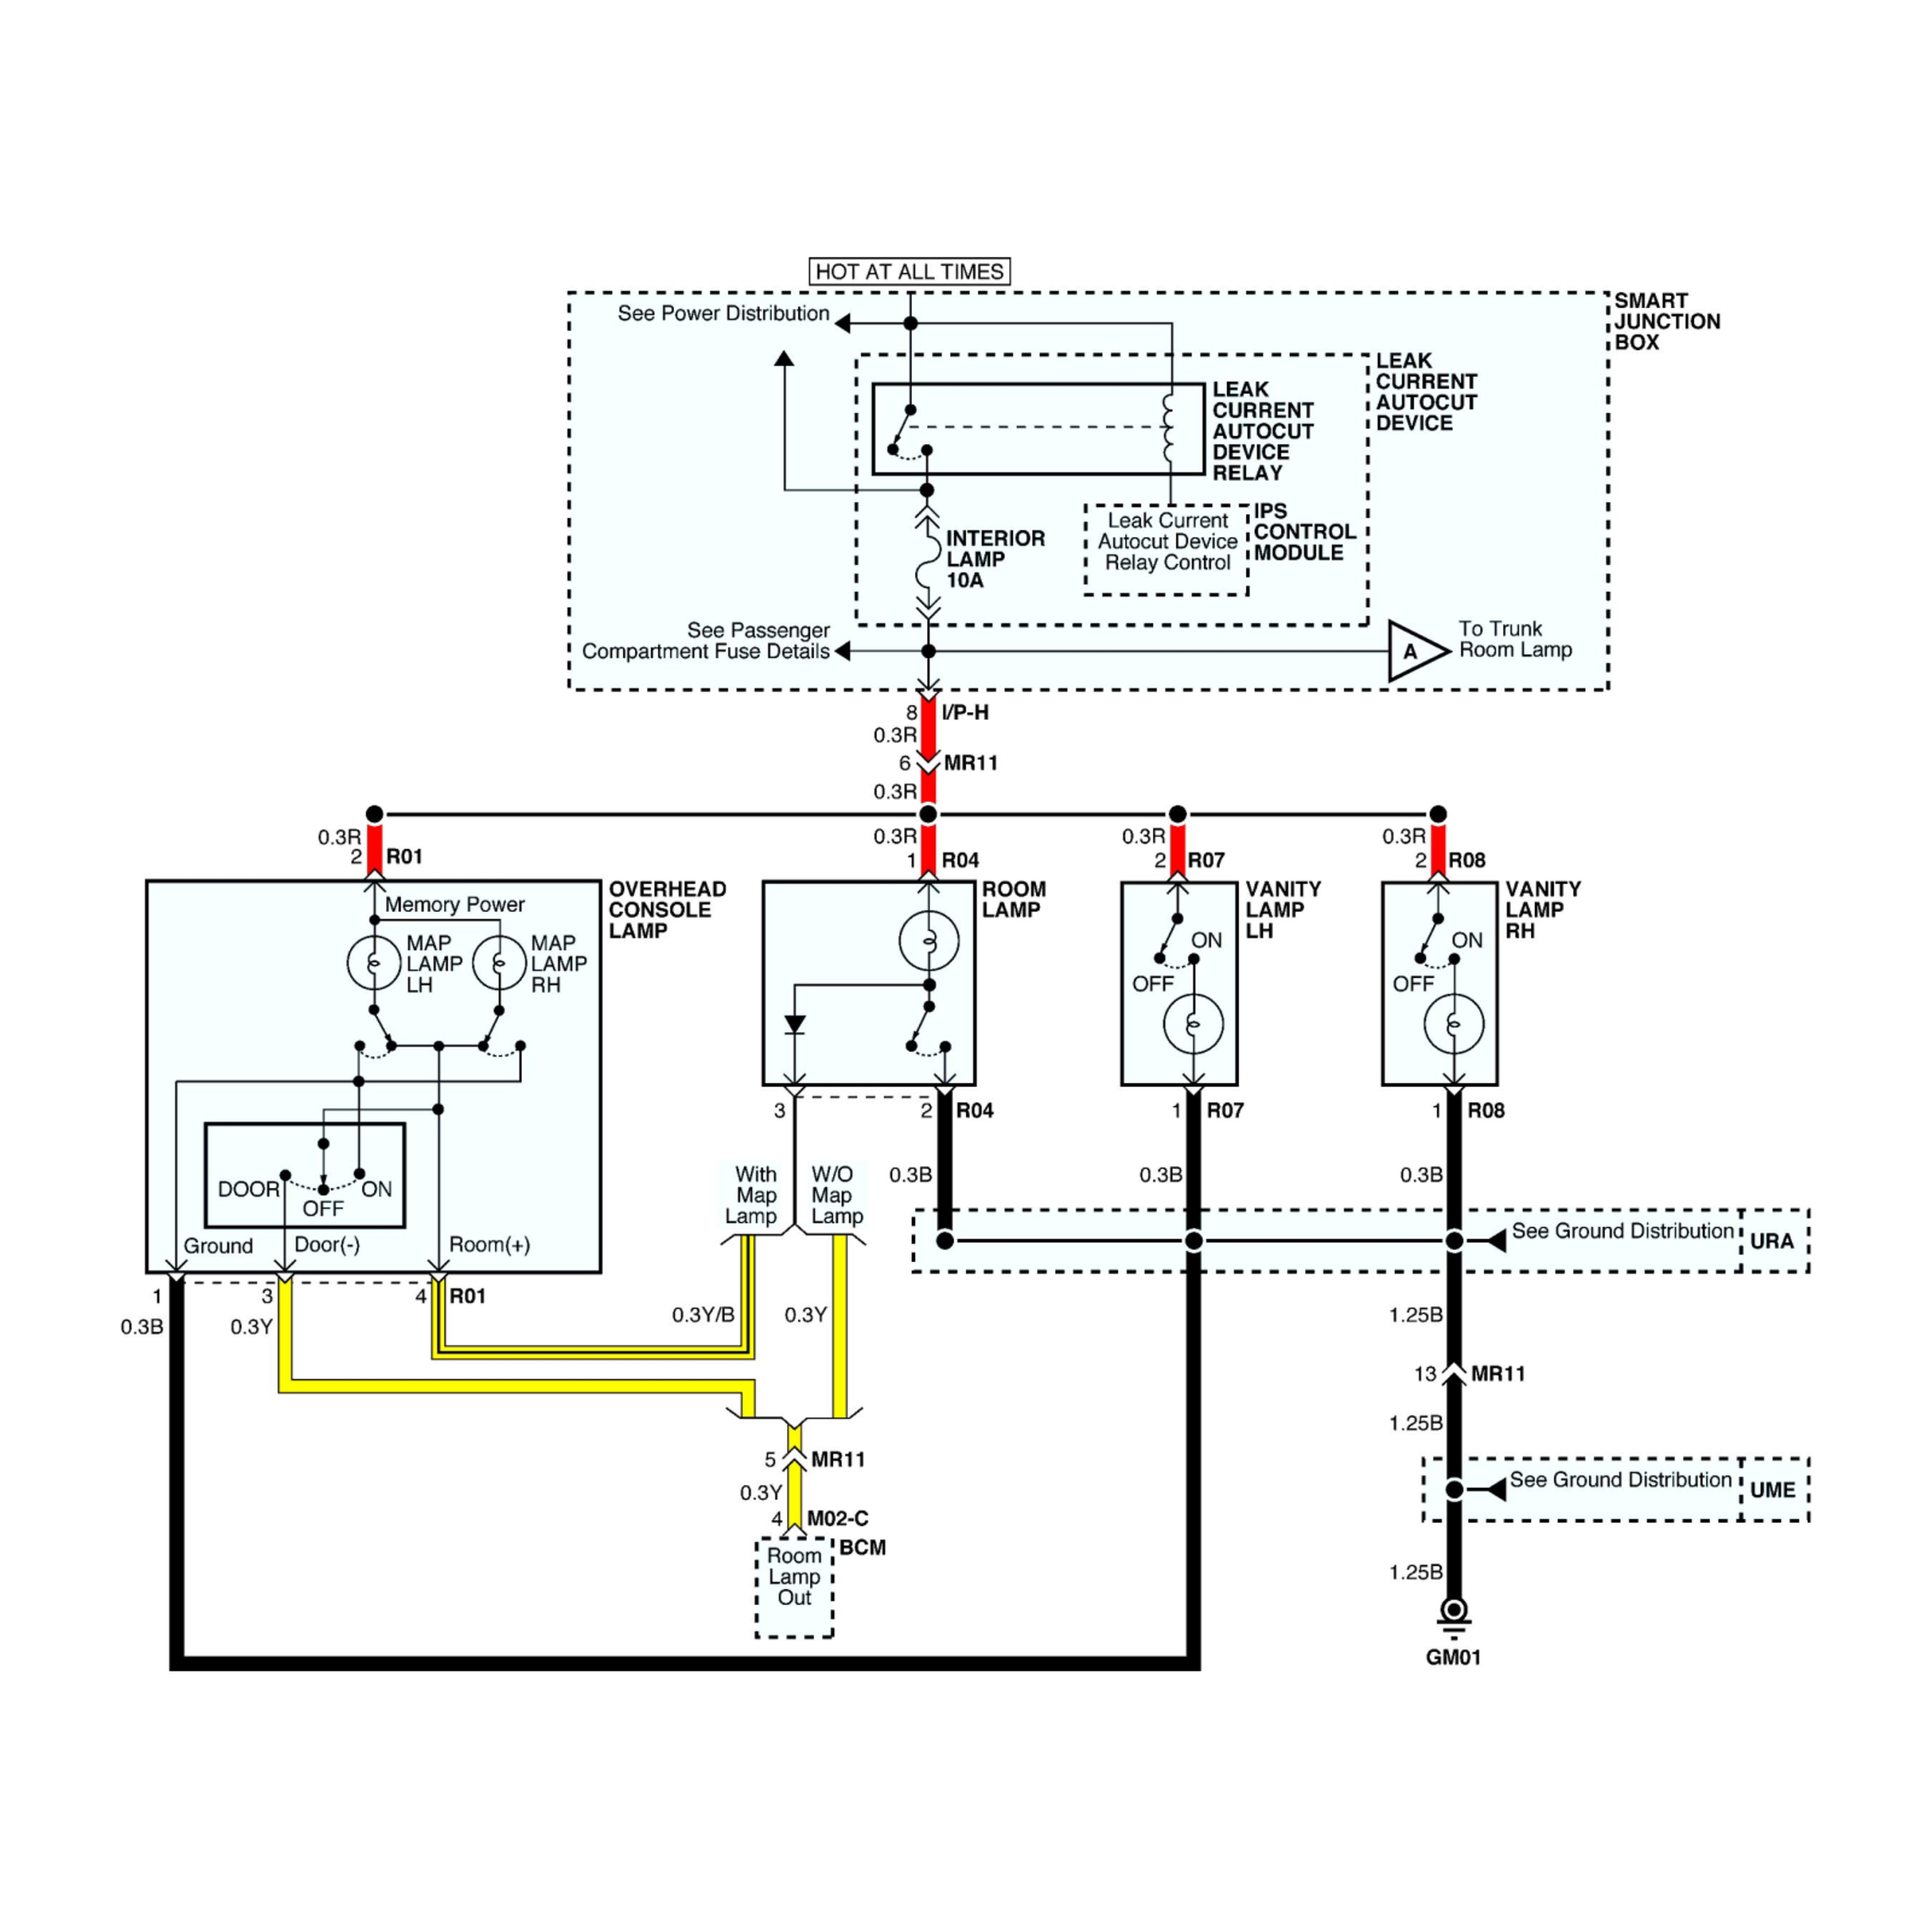 2008 Mercedes-Benz S65 AMG wiring diagrams example